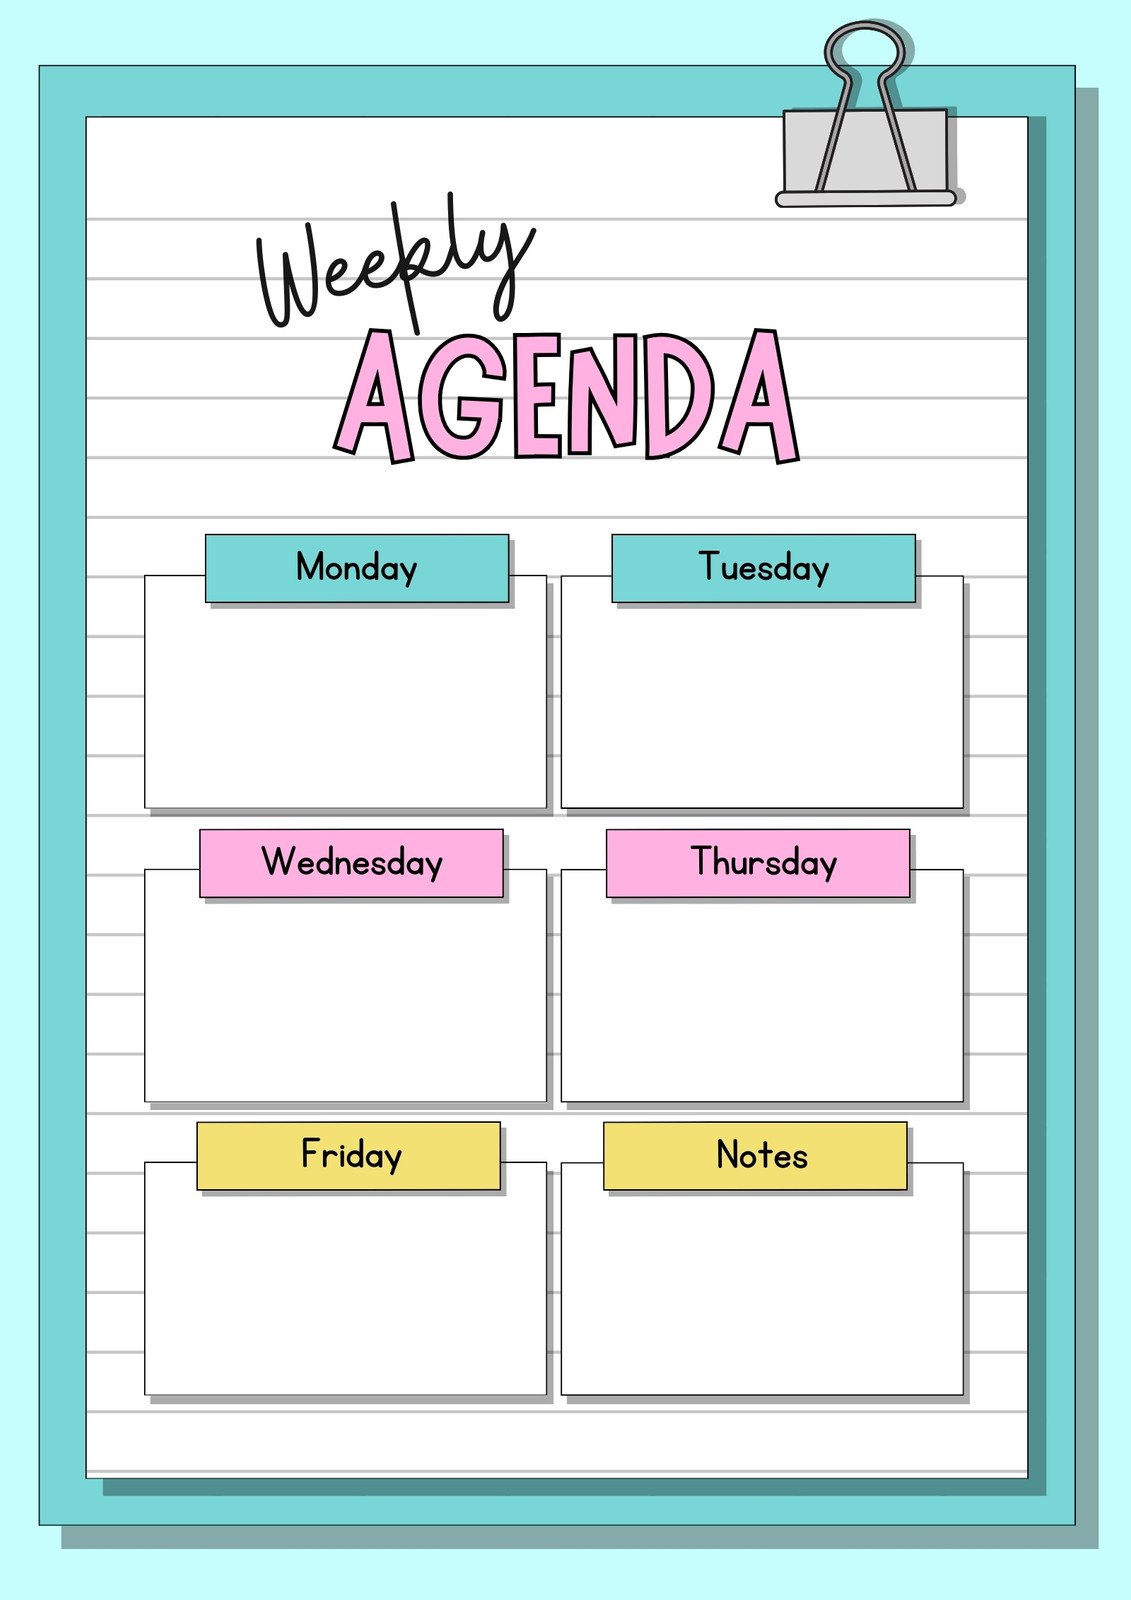 Weekly planner. Minimalistic design with pastel colors. Weekly